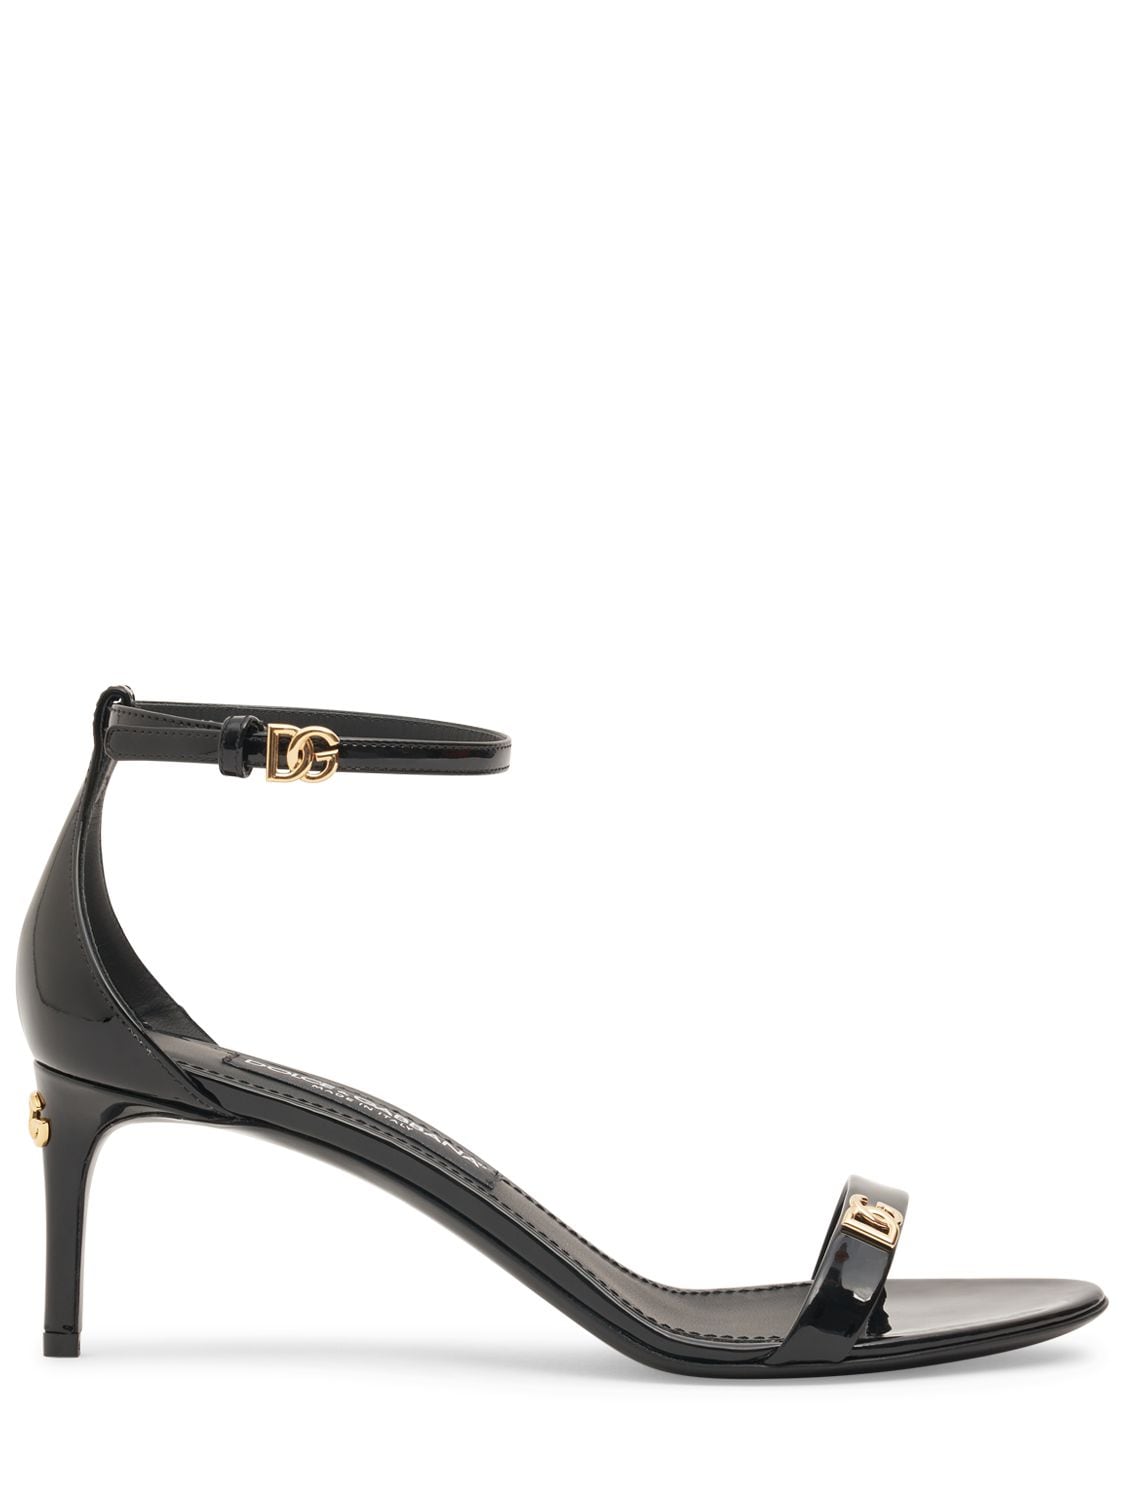 Dolce & Gabbana 60mm Keira Patent Leather Sandals In Black